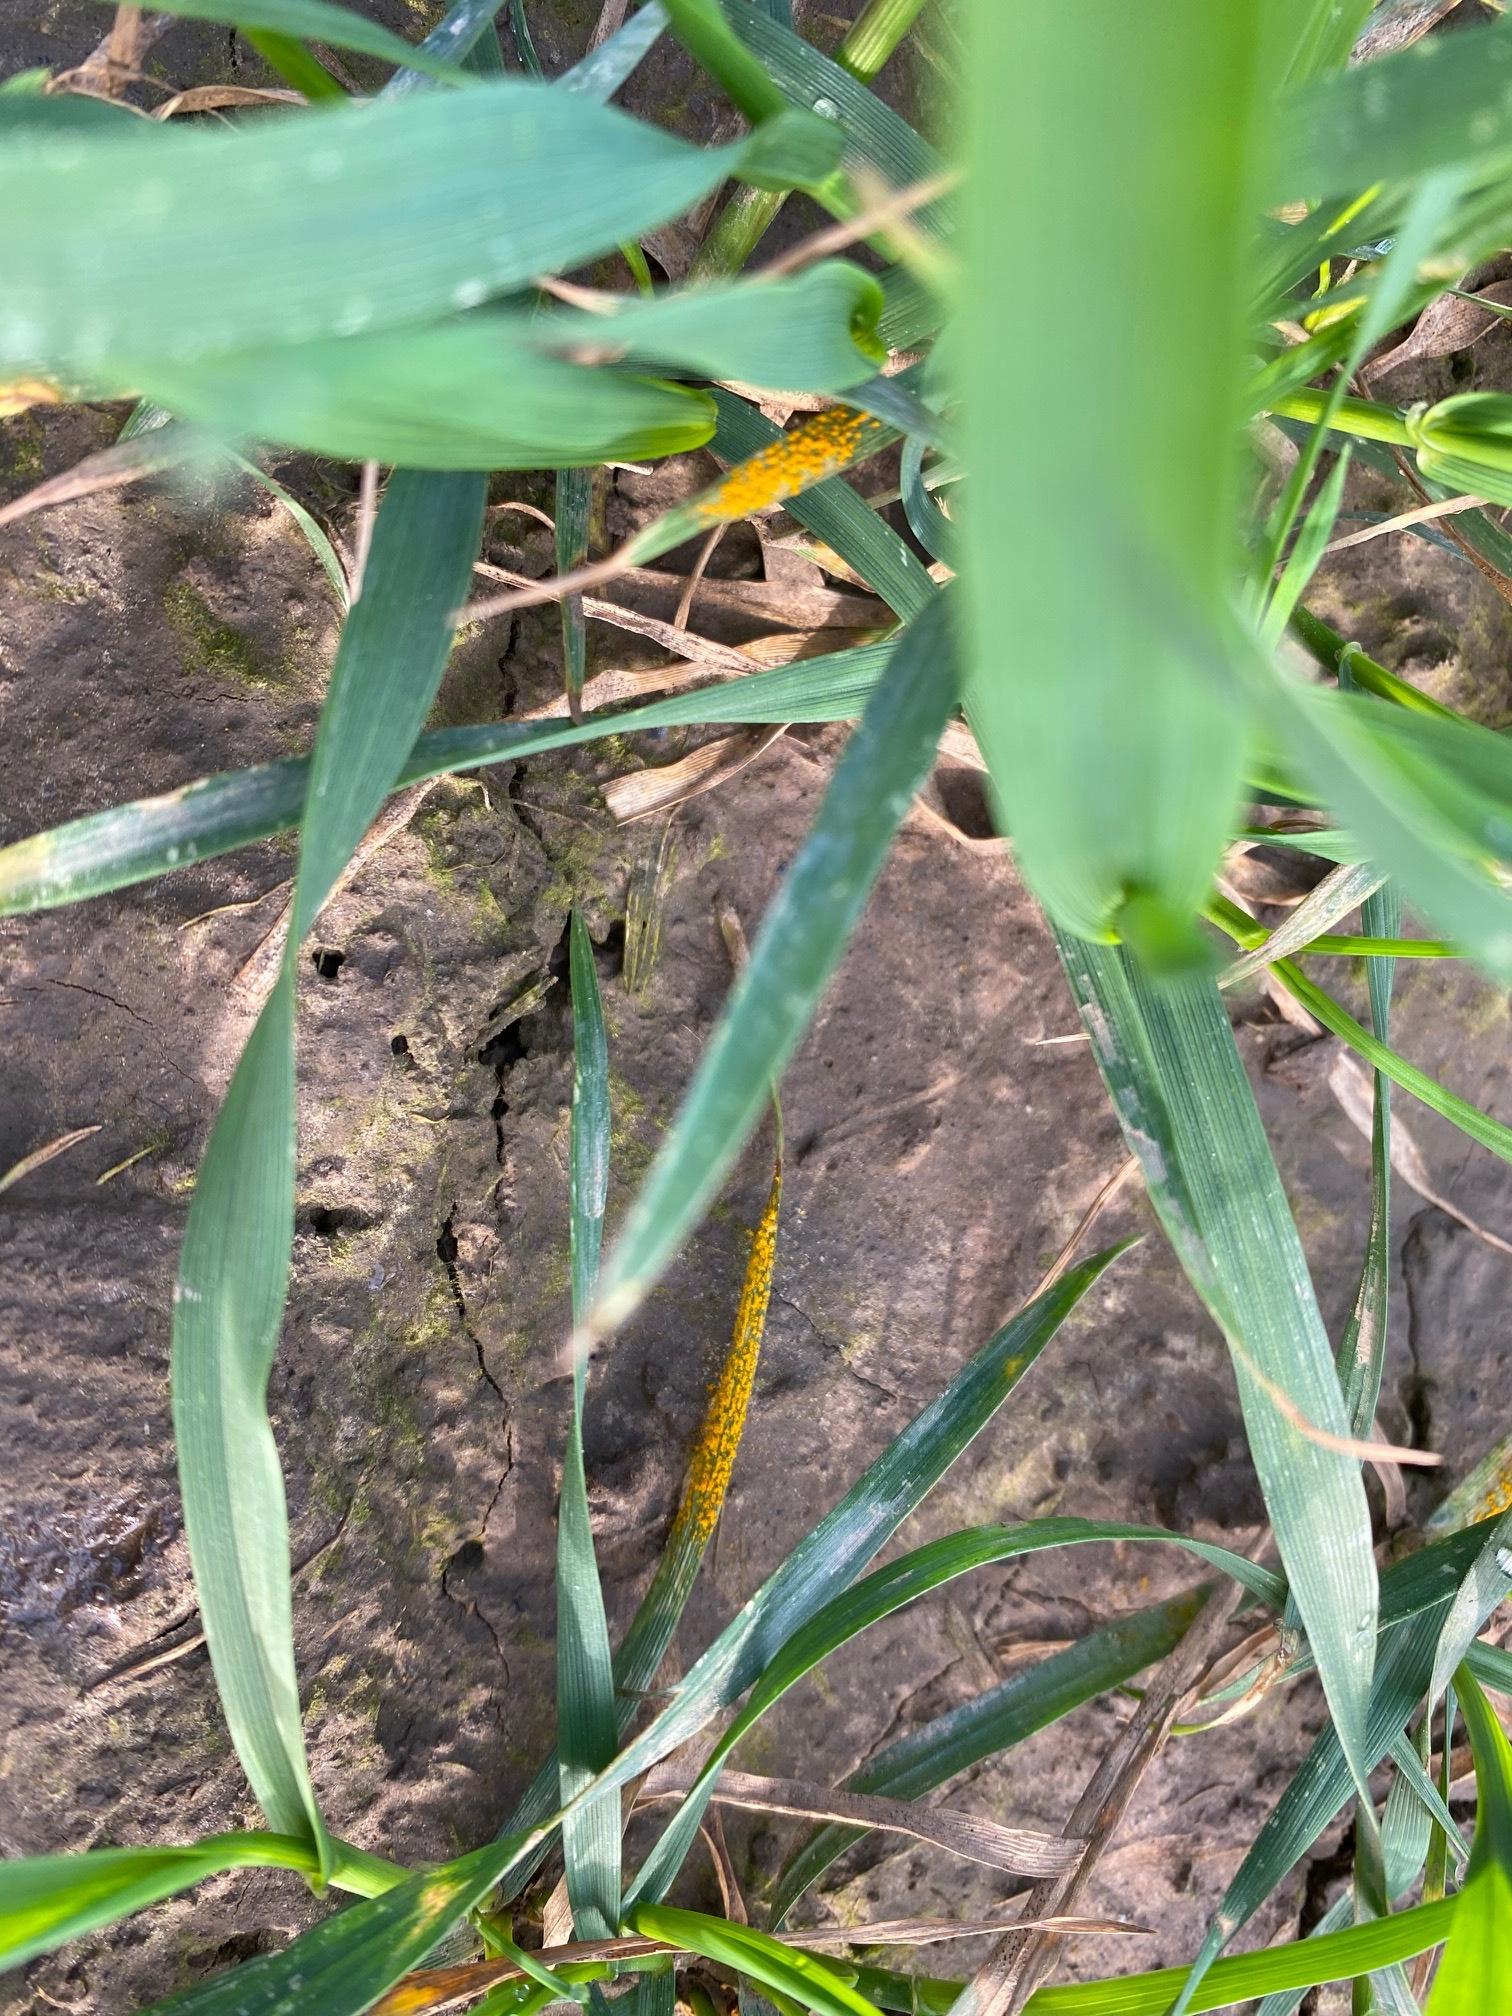 Yellow rust on the lower leaves pictured earlier this month at the Long Sutton test site